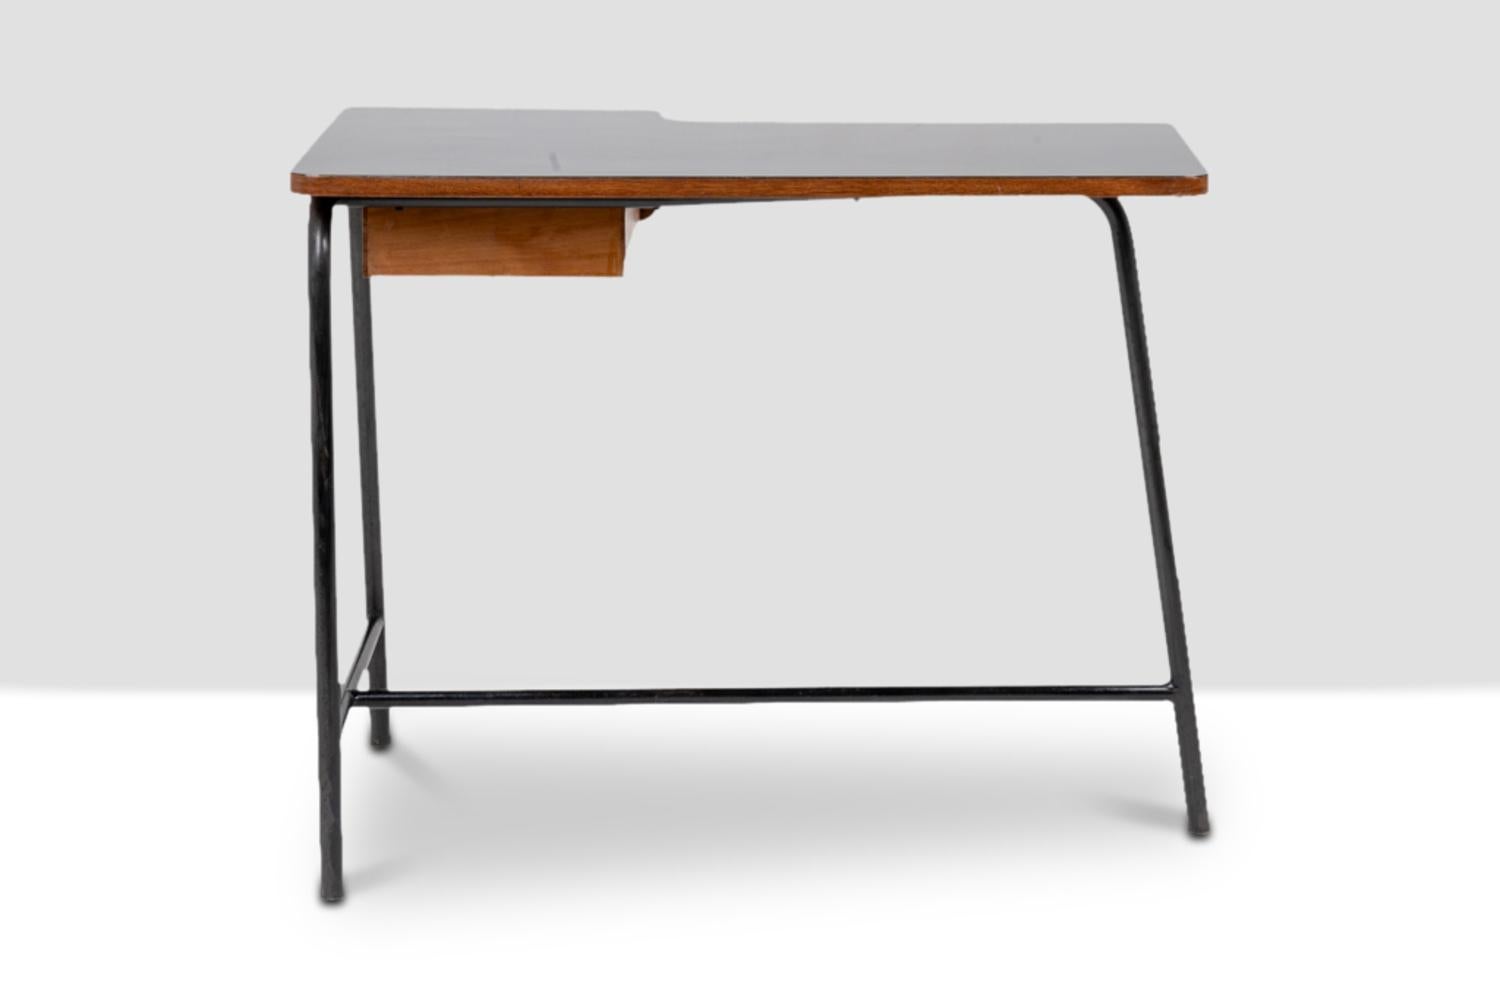 Jacques Hitier for MBO.

Blond oak desk opening with a drawer on the front. Black laminate top. Tripod base in black lacquered metal.

French work realized in 1951.

Reference: LS5469909E